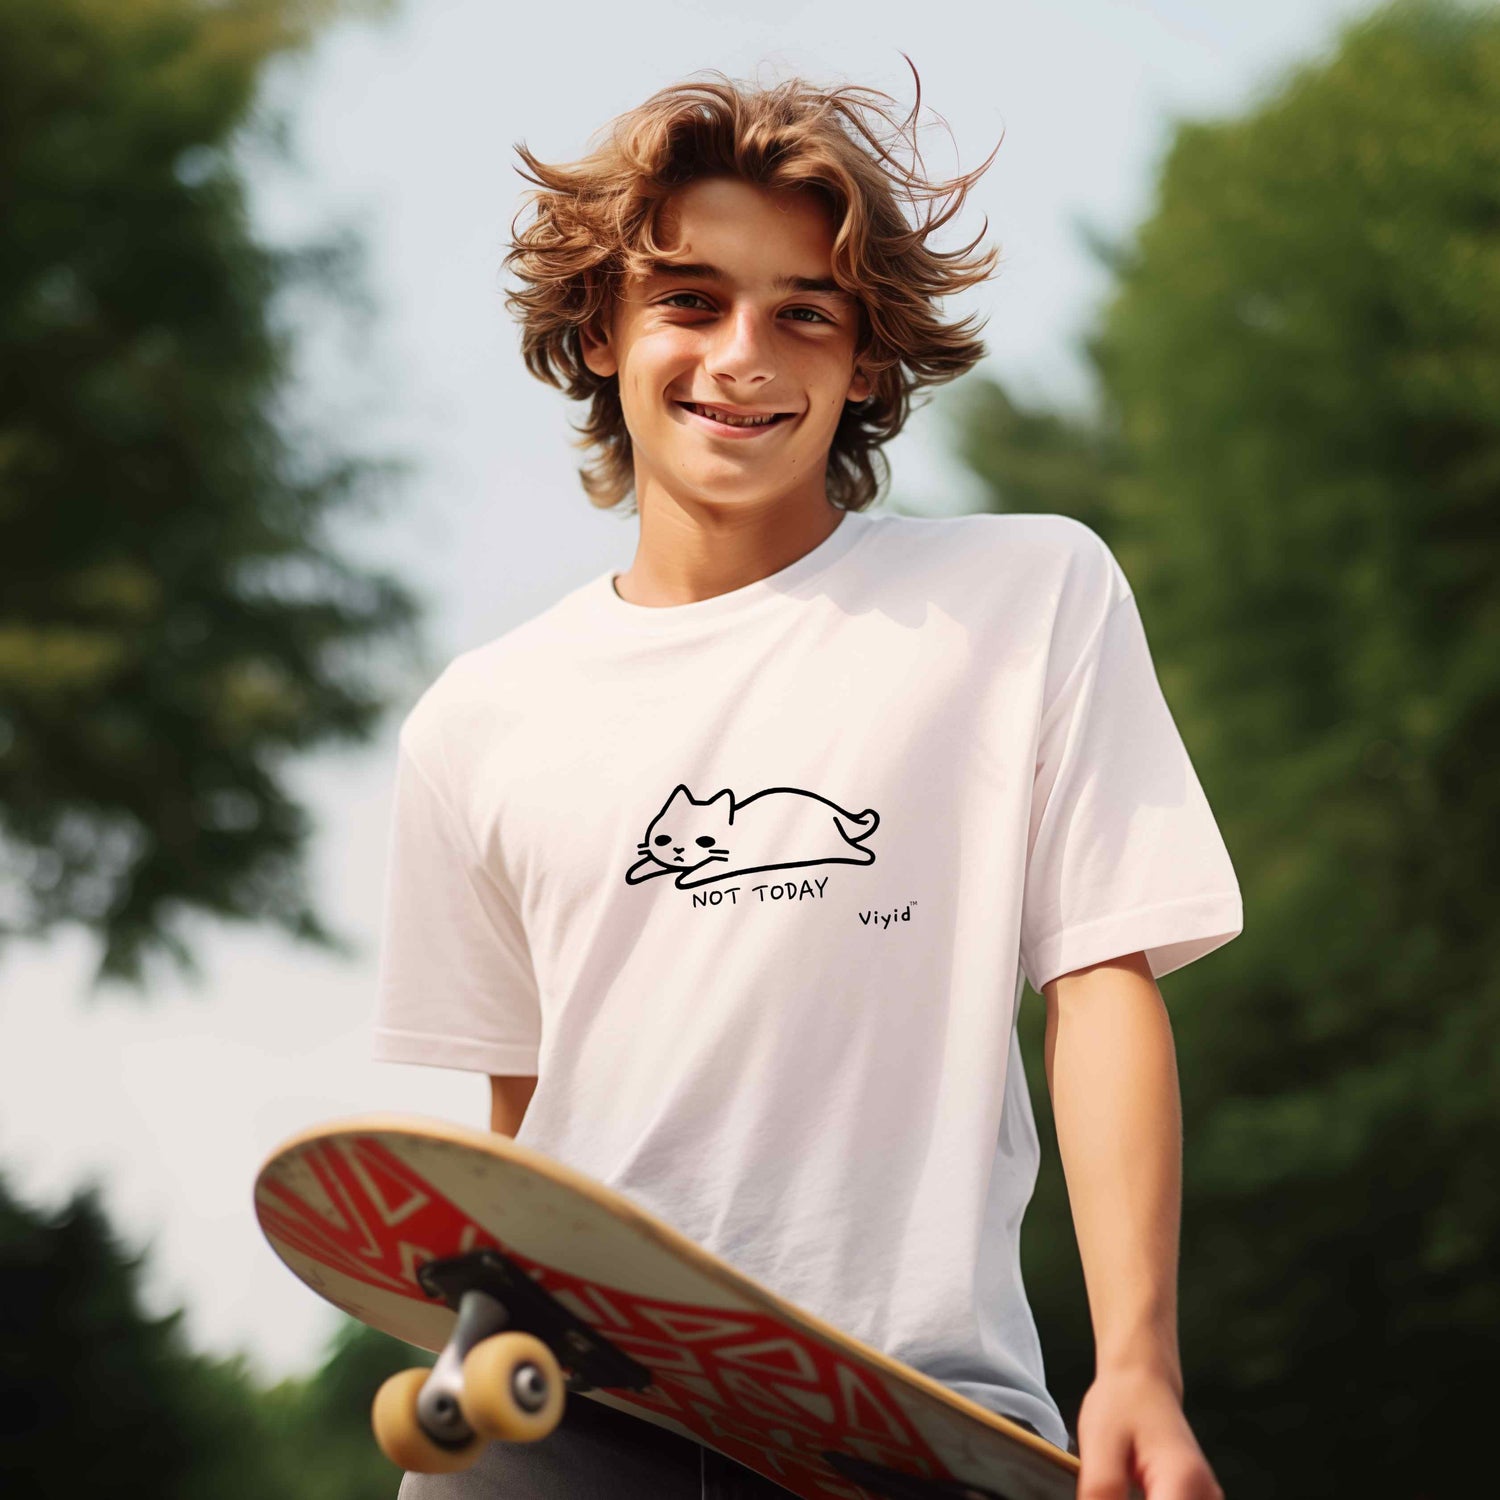 youth t-shirt collection cover image of a young white male youth holding a skateboard and wearing a white t-shirt with a cat doodle saying "not today" 